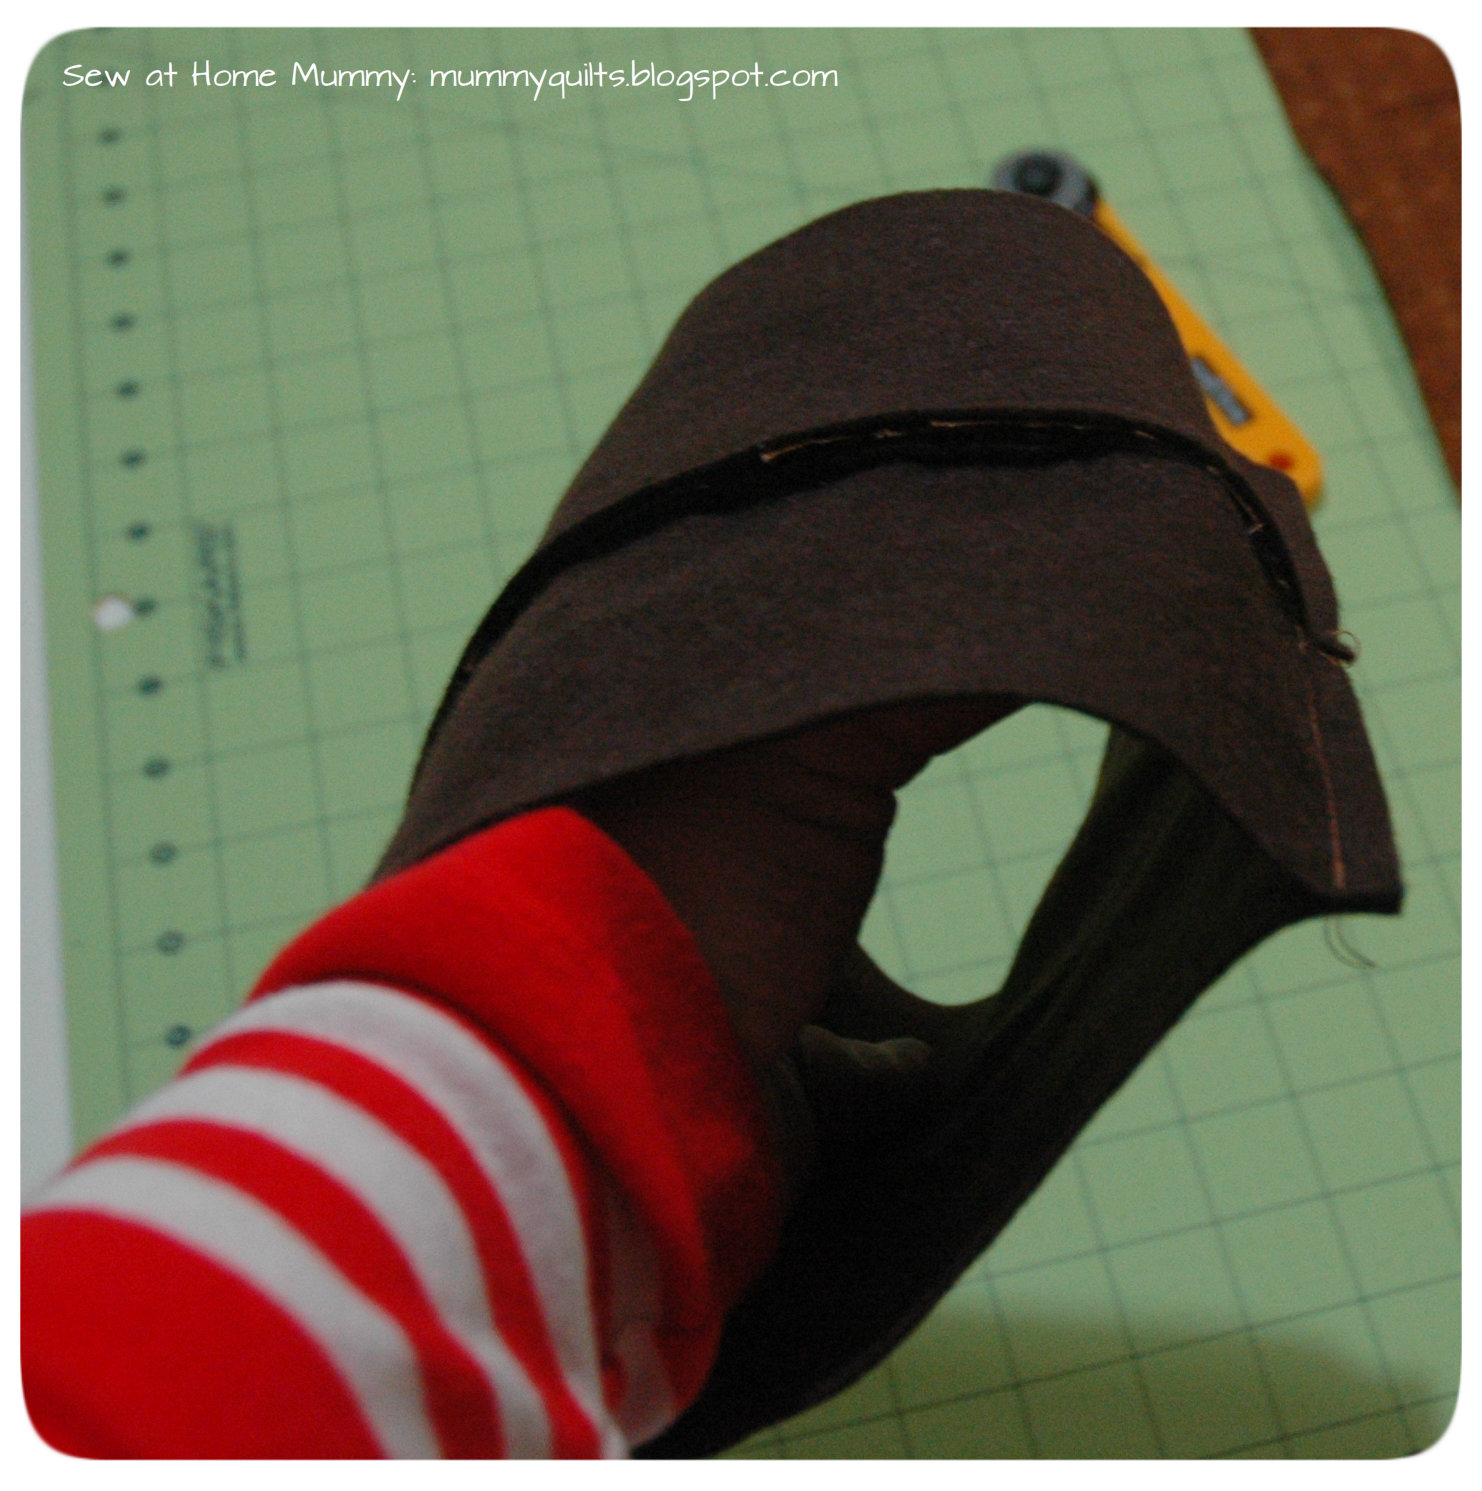 Sew at Home Mummy: The Big Stocking Project: Tutorial & HUGE GIVEAWAY!